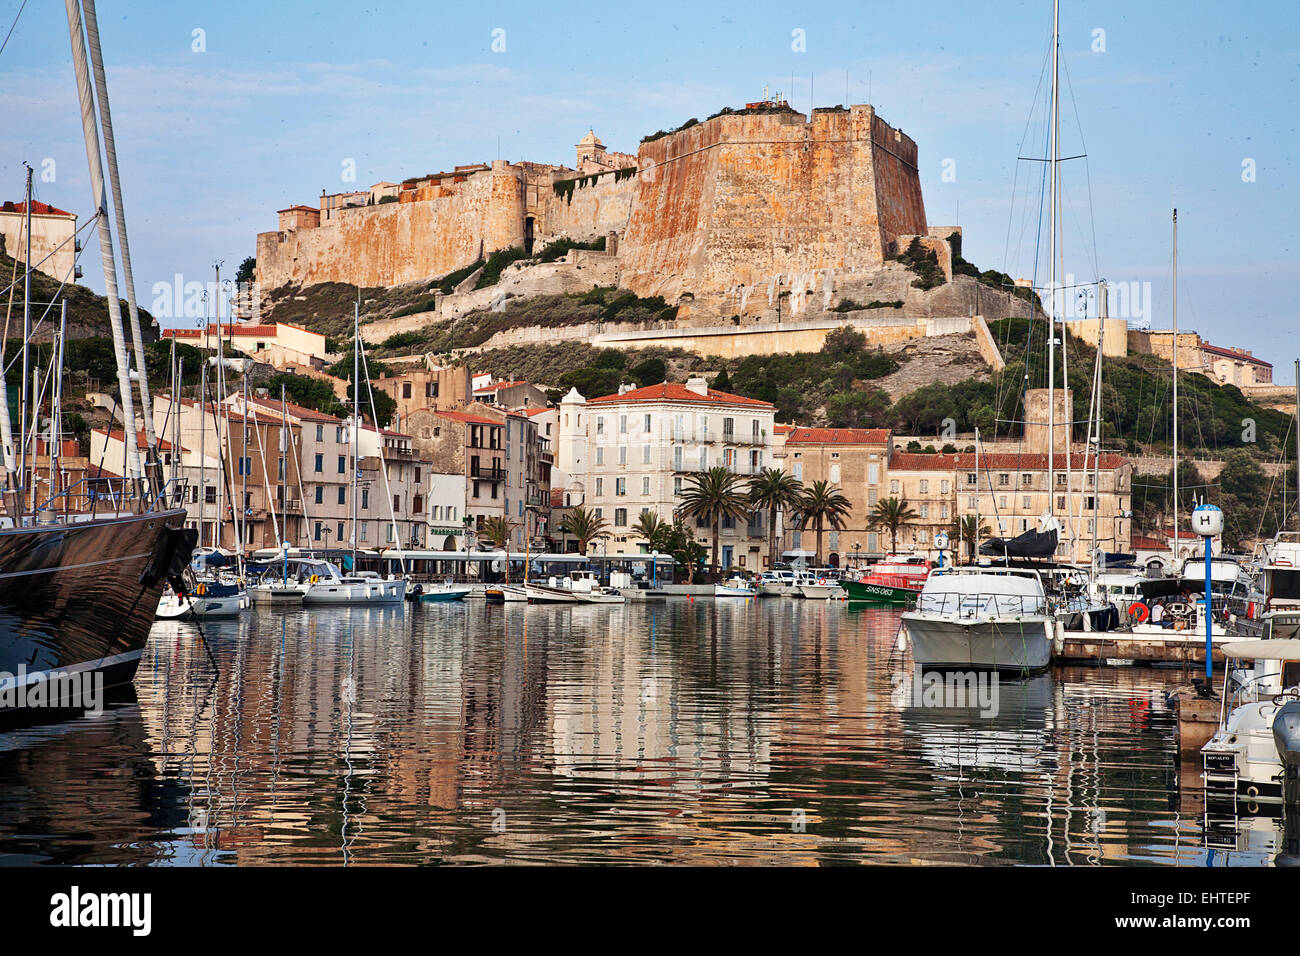 The quay and fortress at Bonifacio are picturesque and historic. Stock Photo